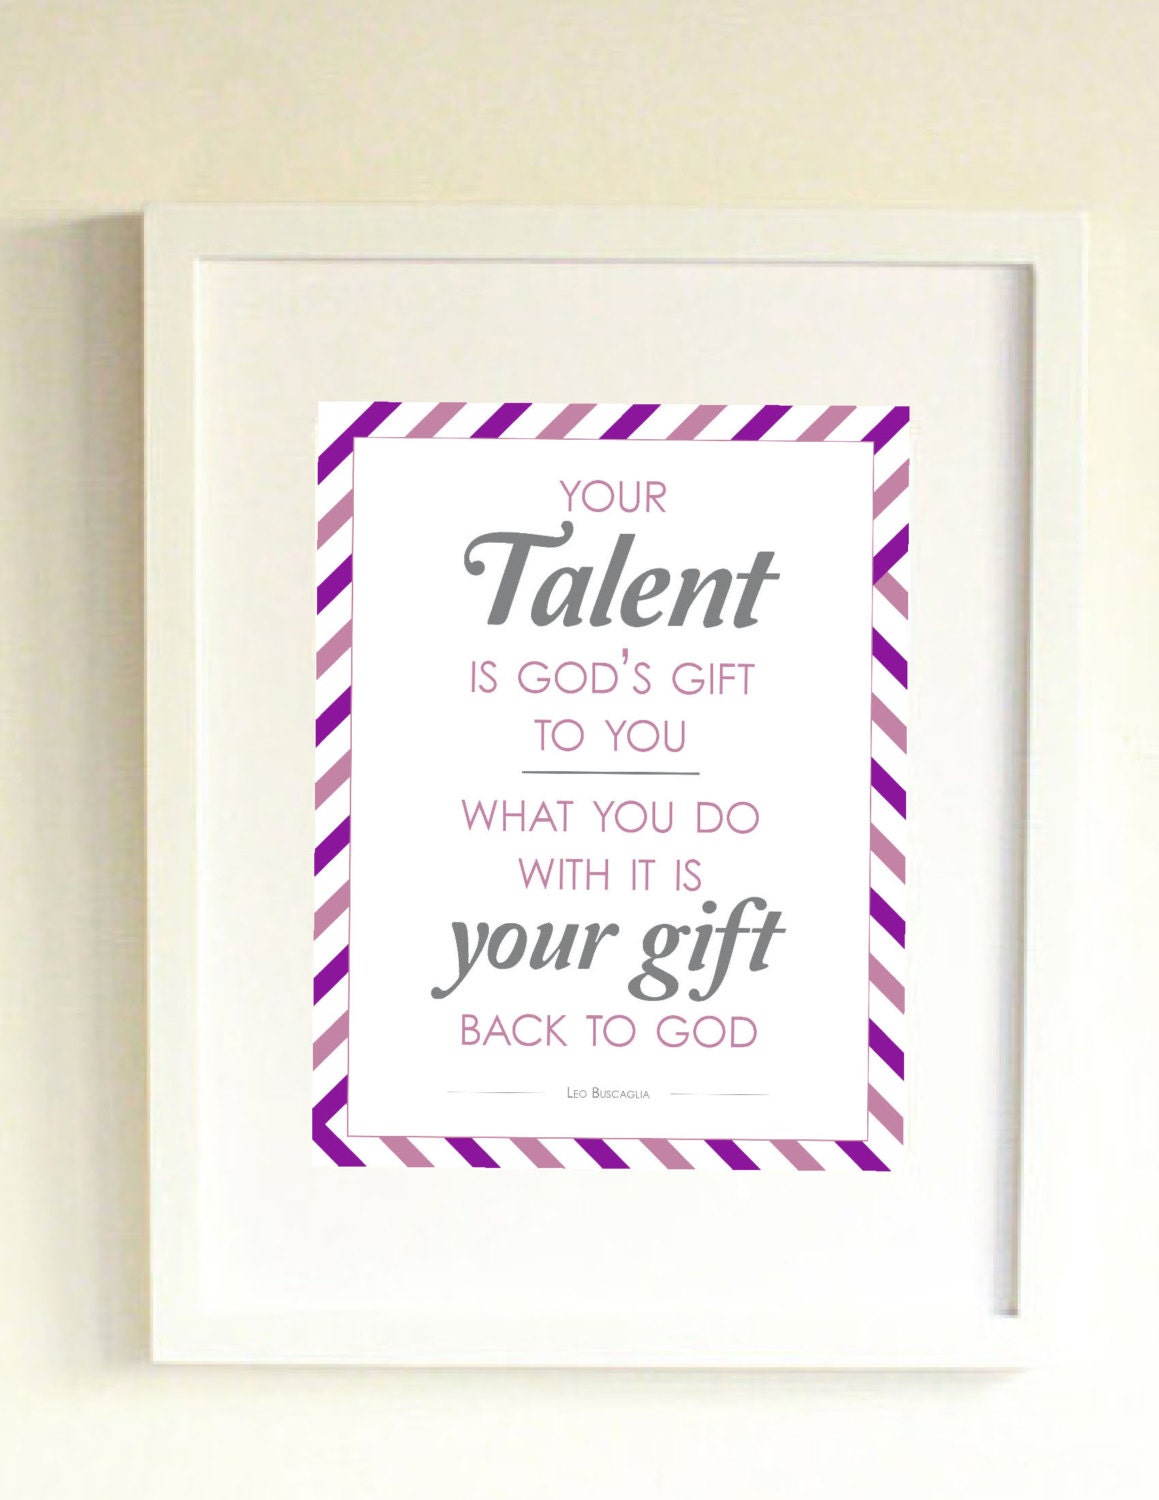 Your Talent is God's Gift // Art Print // Quote // Home